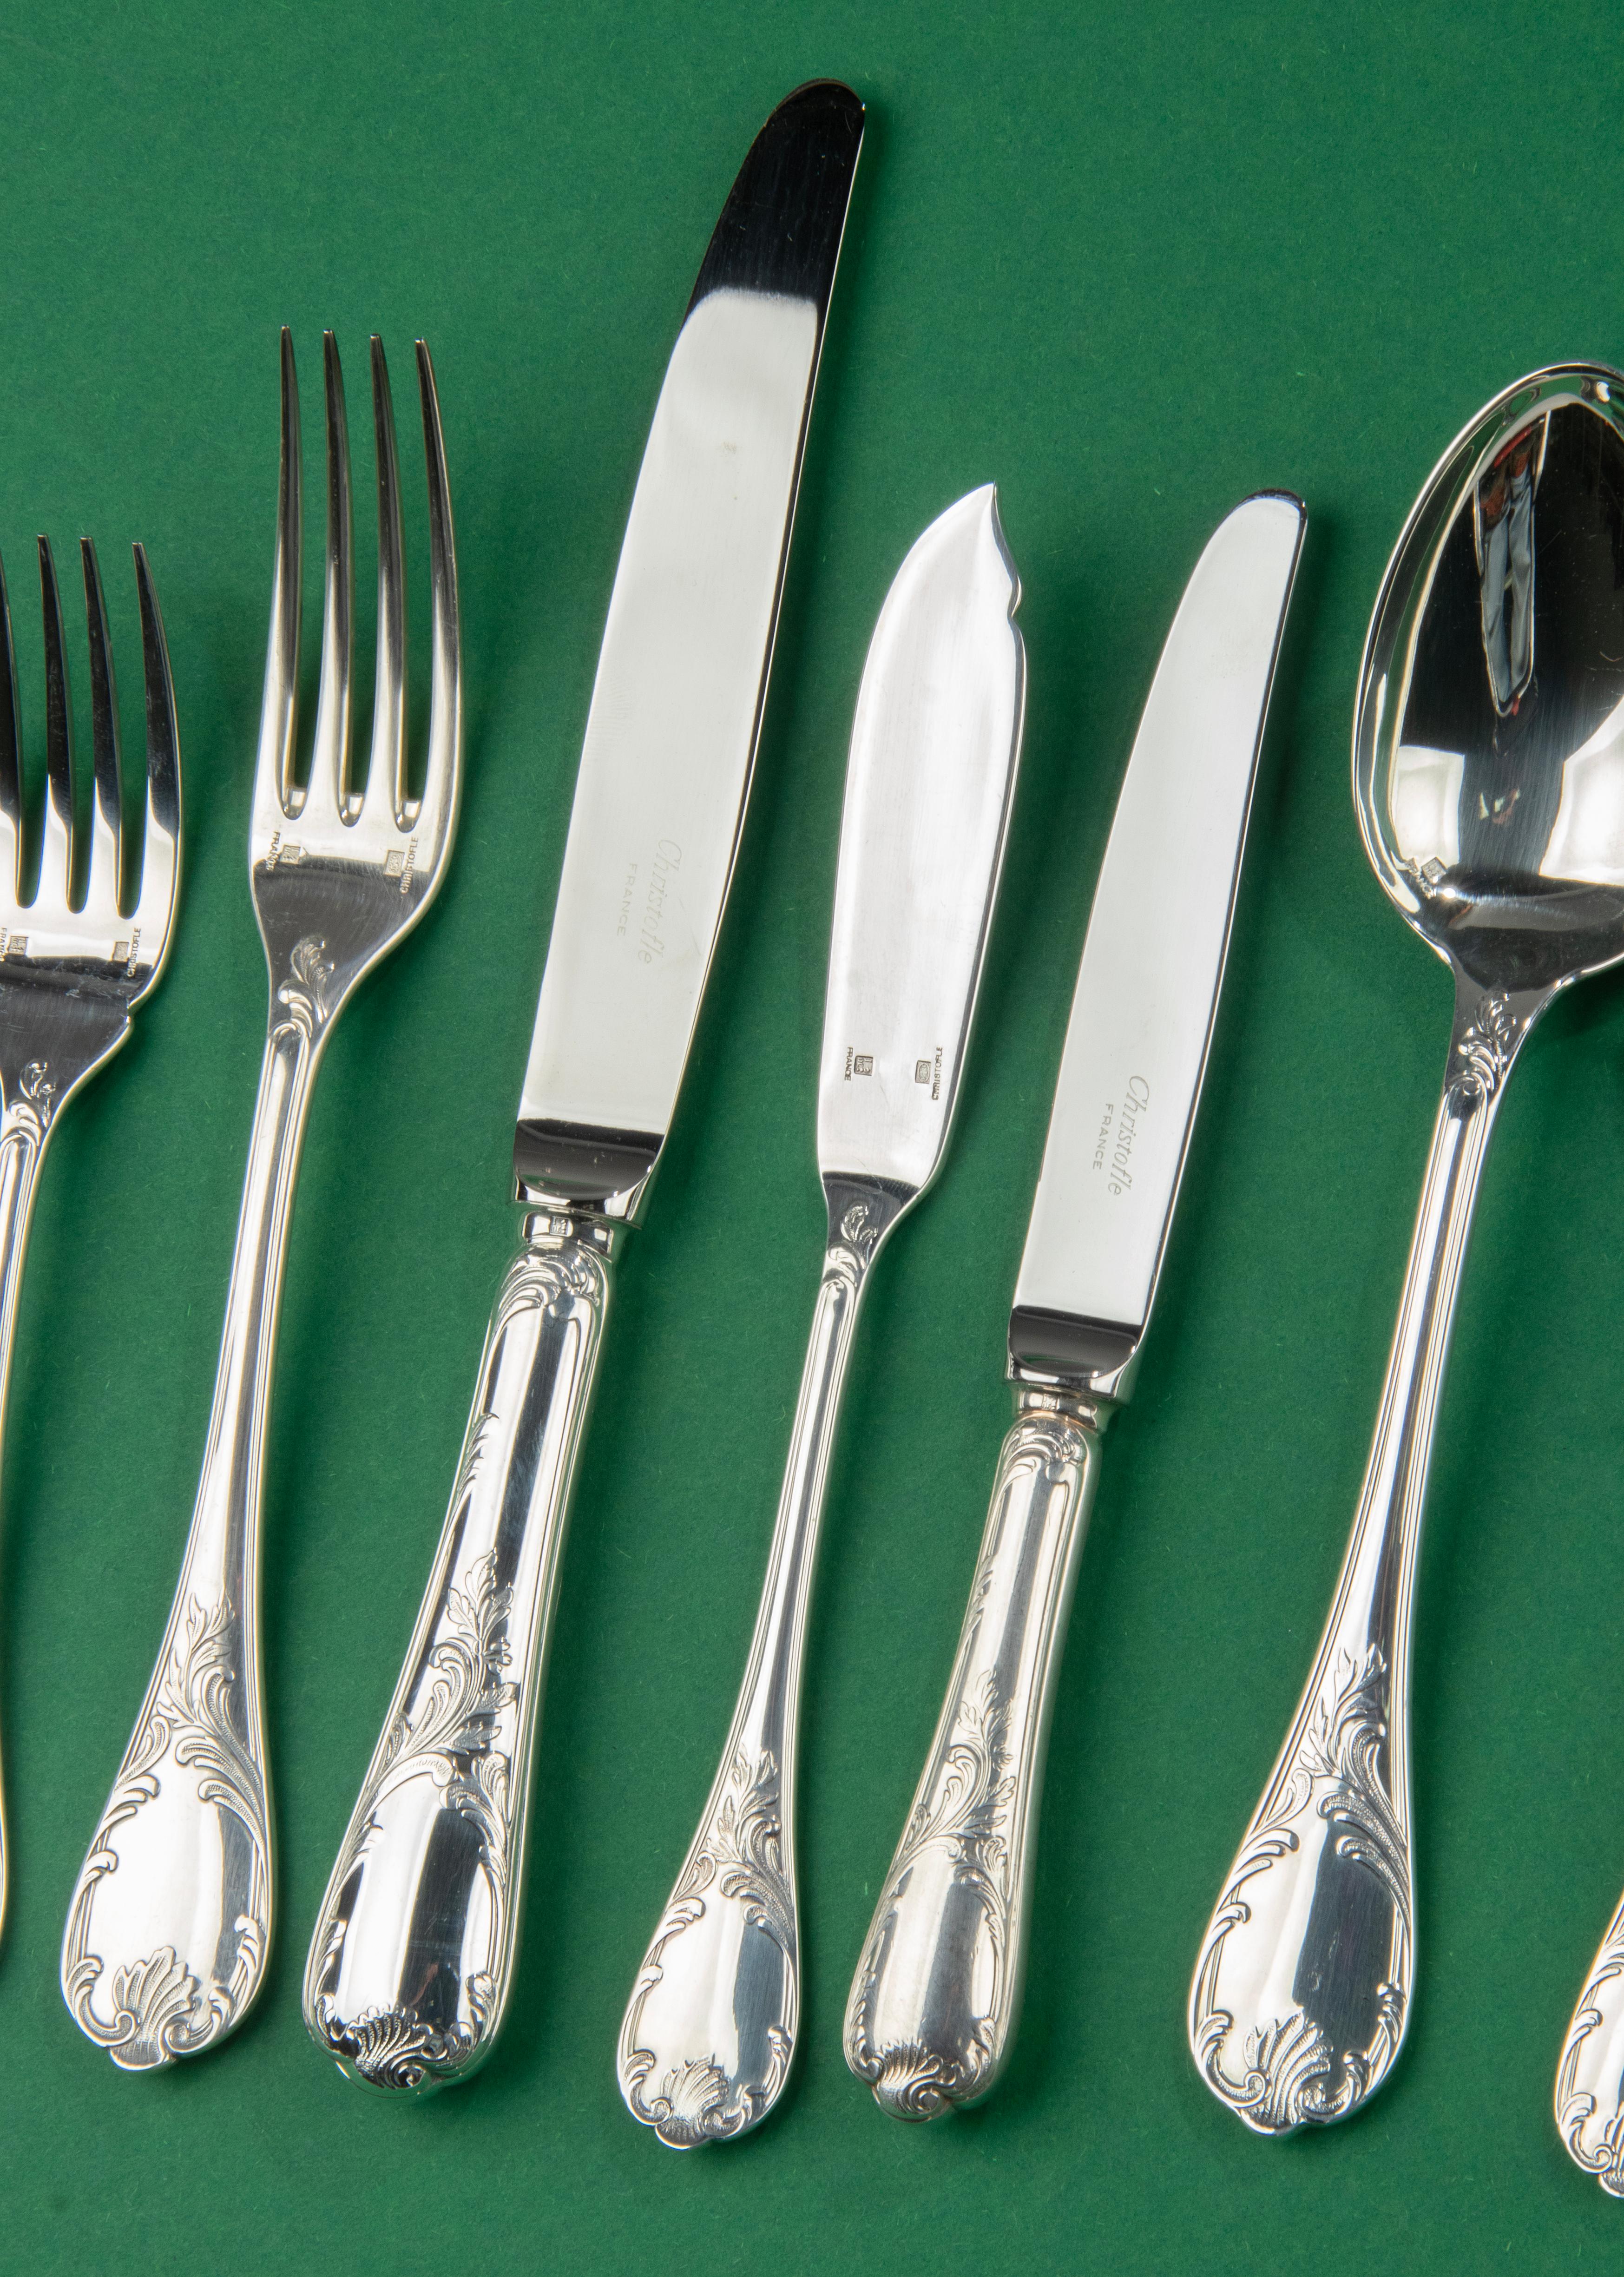 60-Piece Set Silver Plated Flatware - Christofle France - Model Marly 5